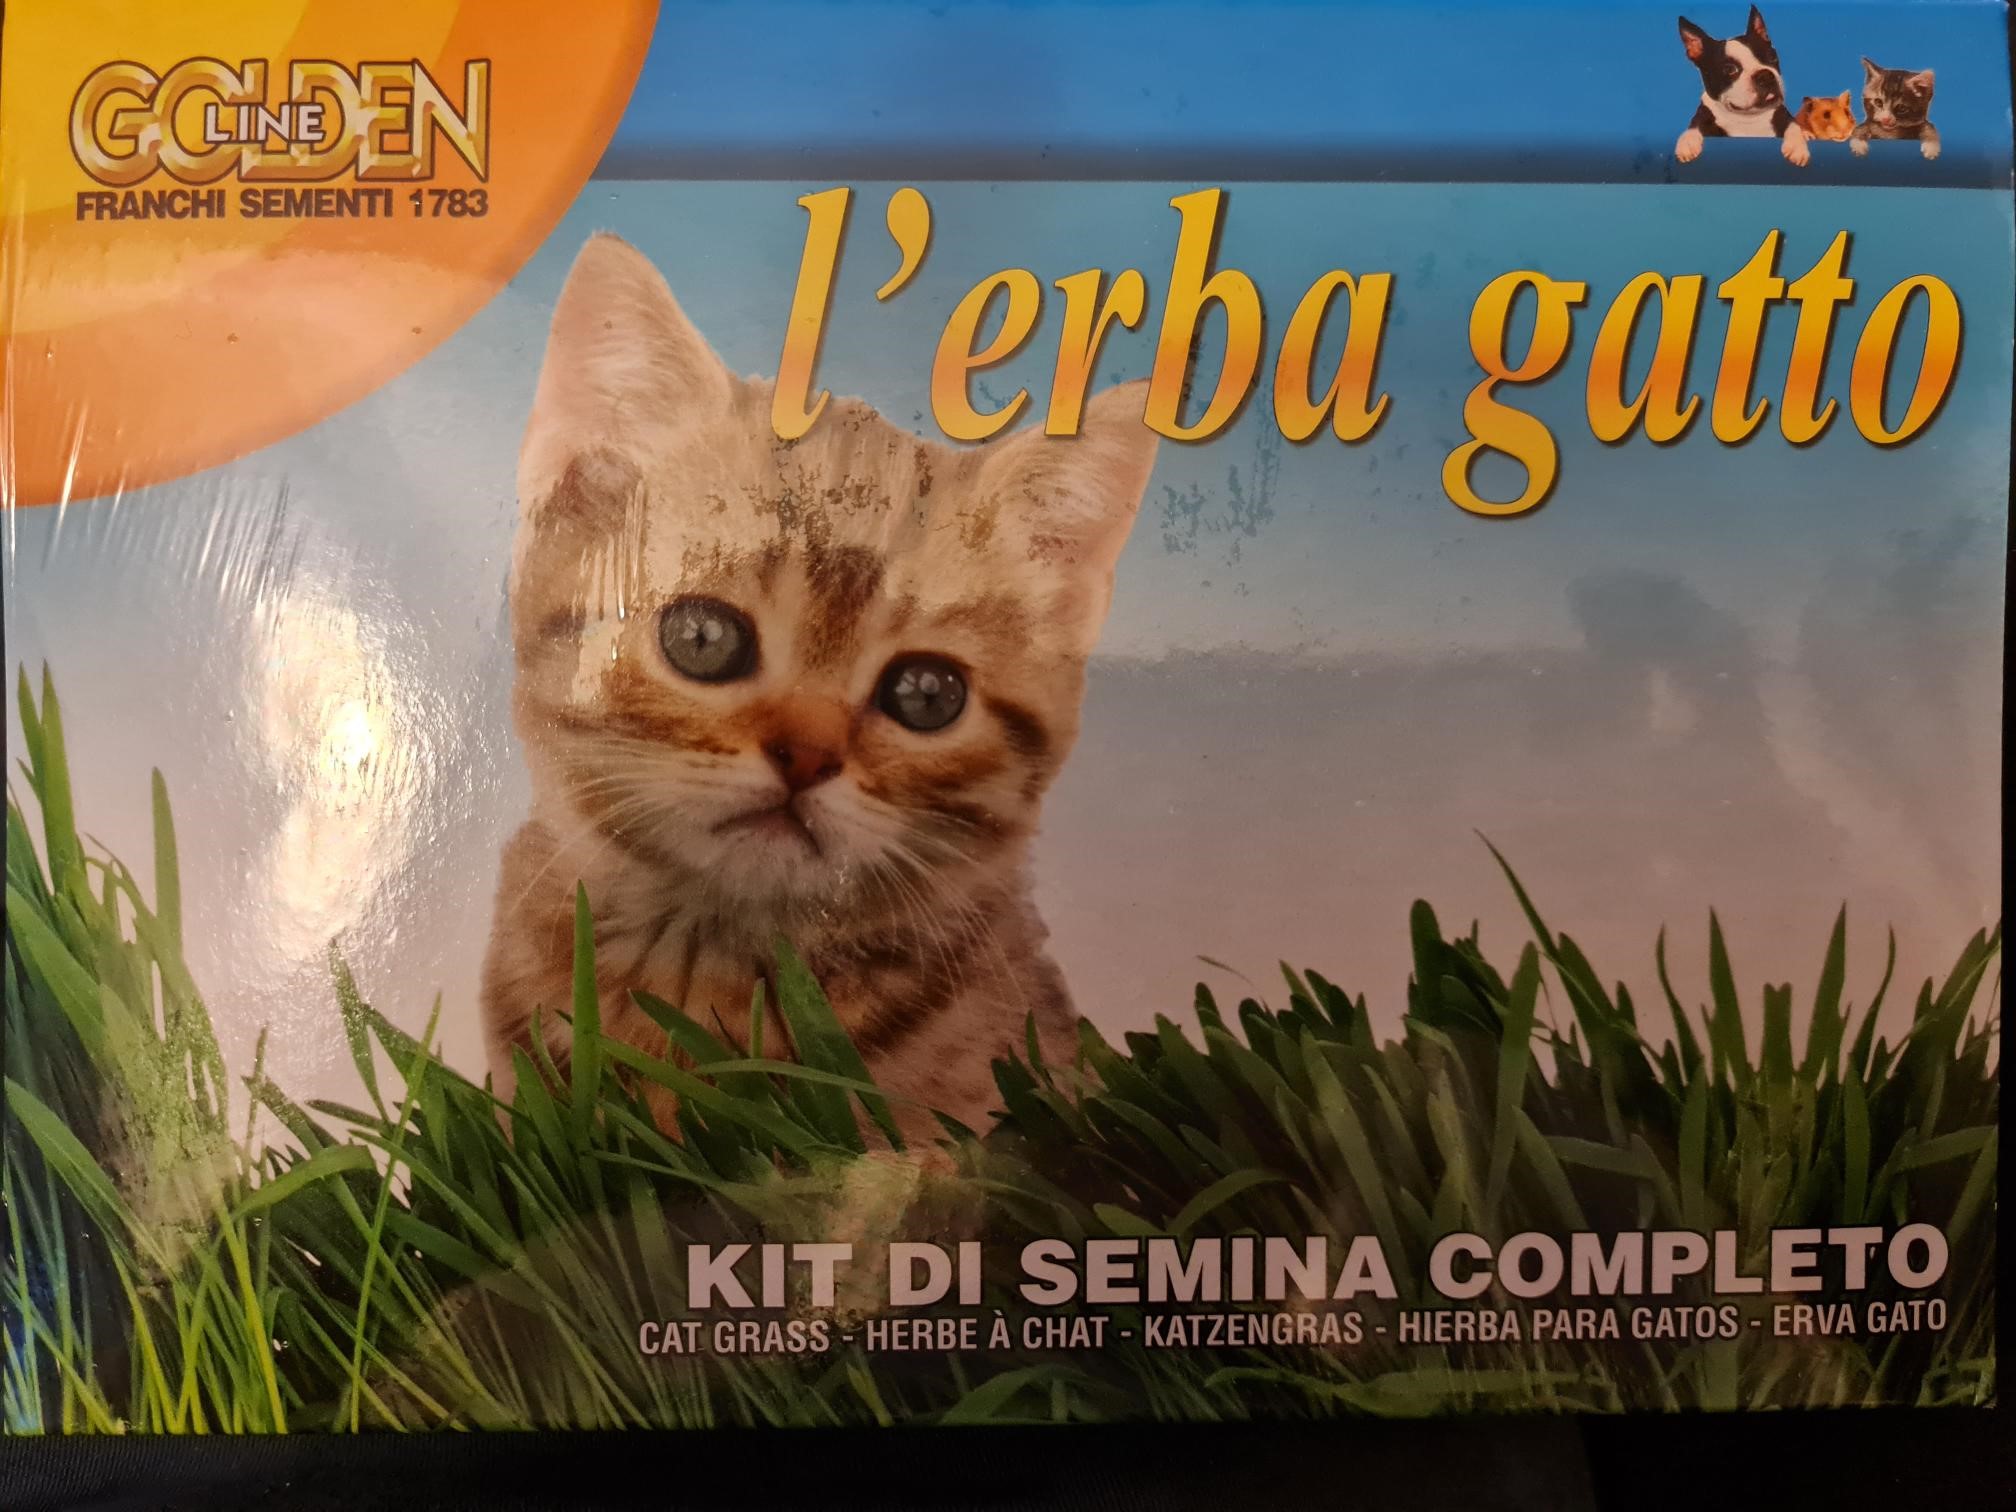 Cat Grass Kit with seed tray - simply add water